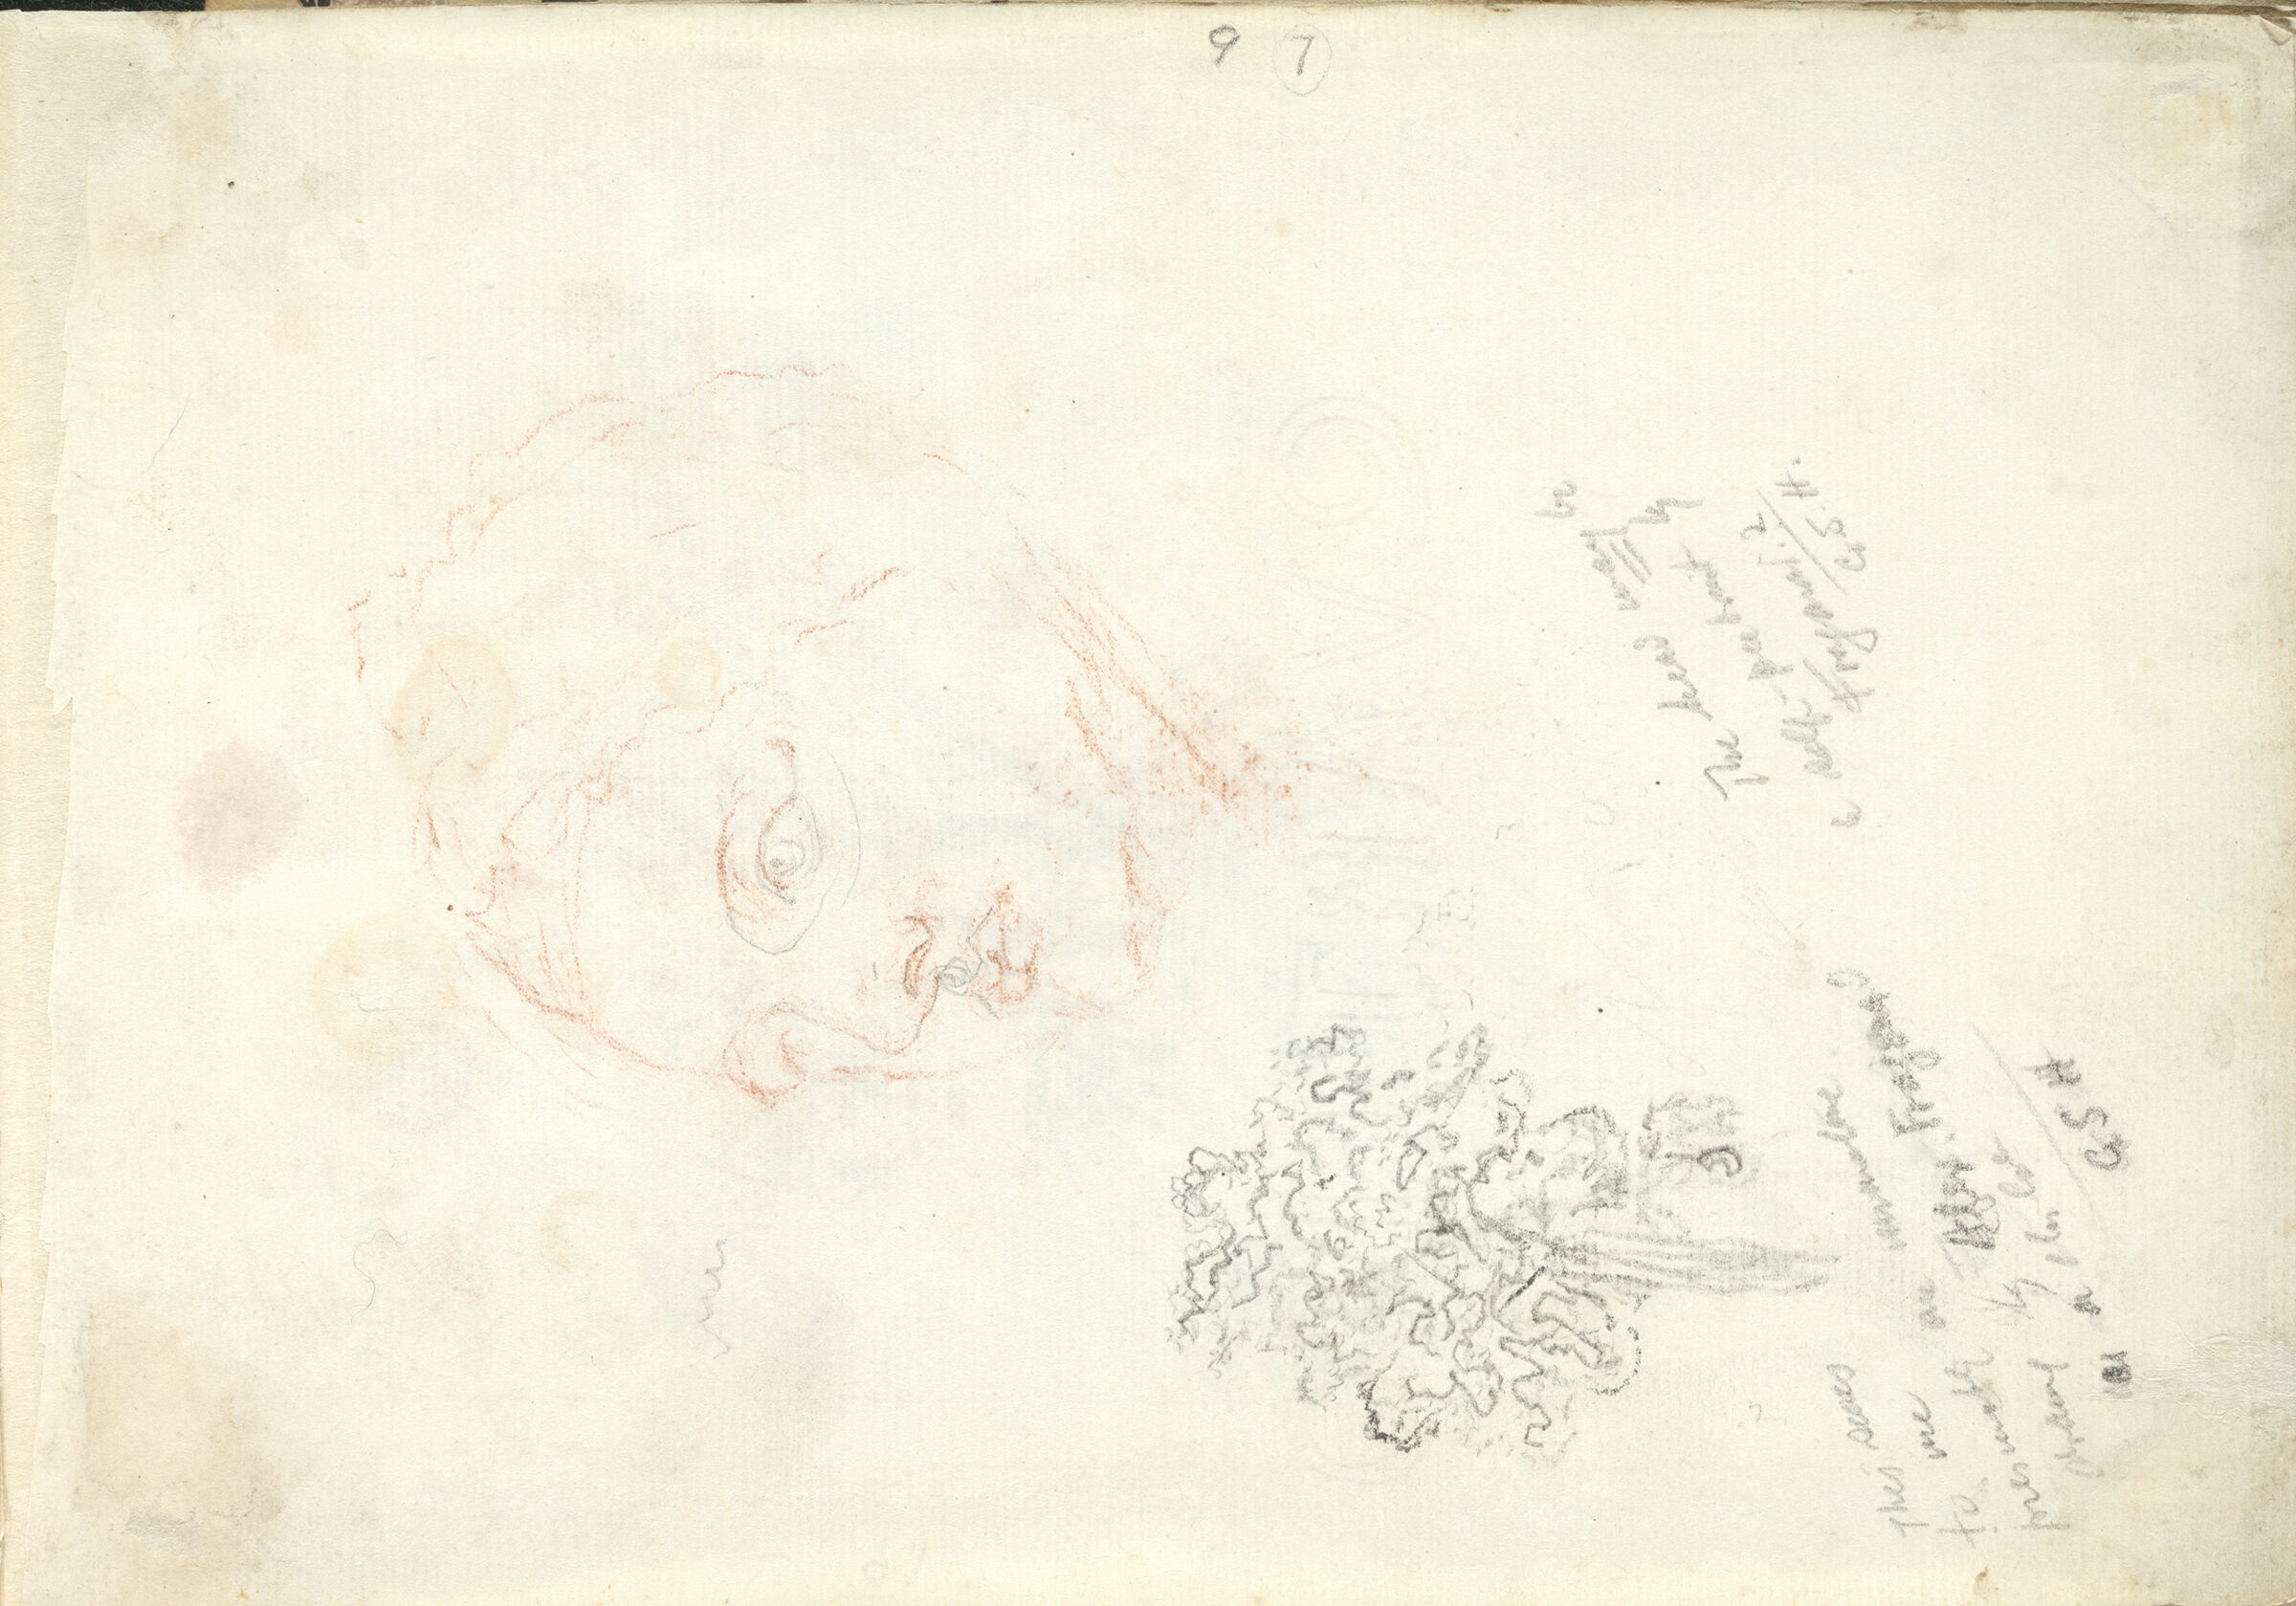 Head Of A Man And A Tree; Verso: Blank Page